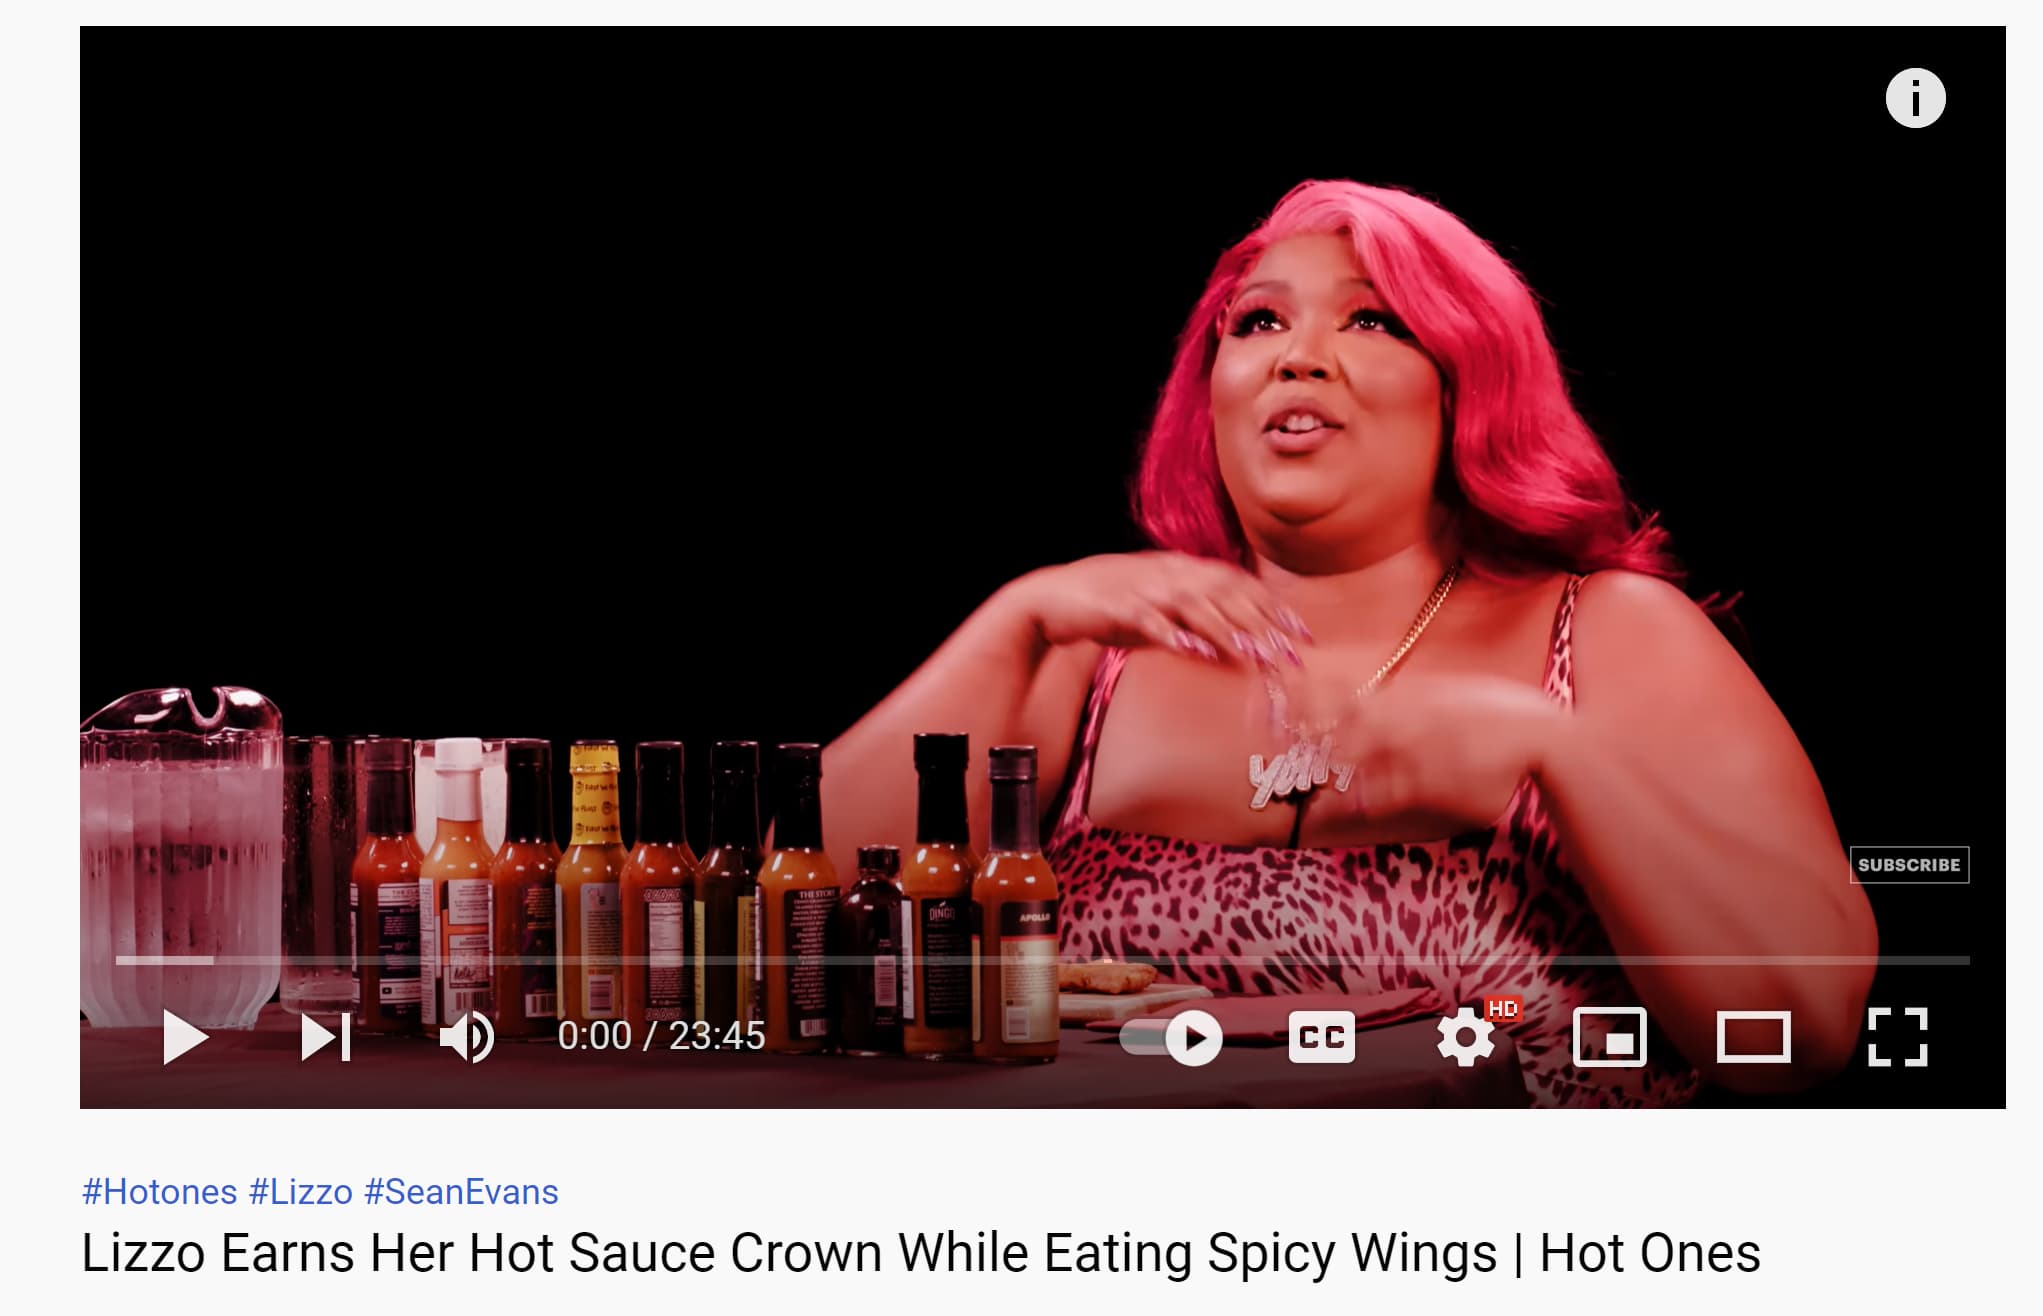 YouTube hashtags are used to promote this YouTube video about the singer Lizzo